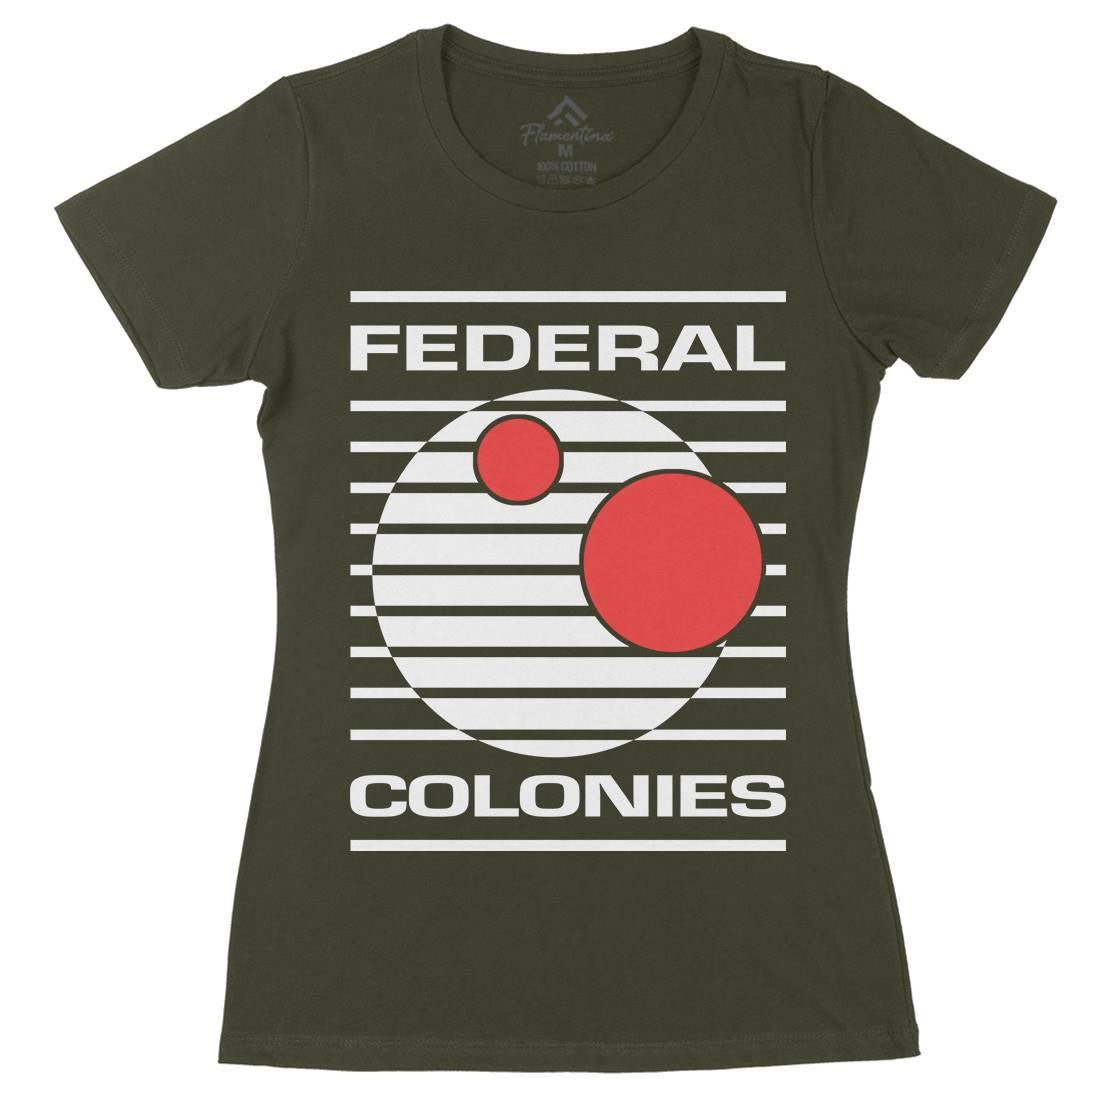 Federal Colonies Womens Organic Crew Neck T-Shirt Space D409